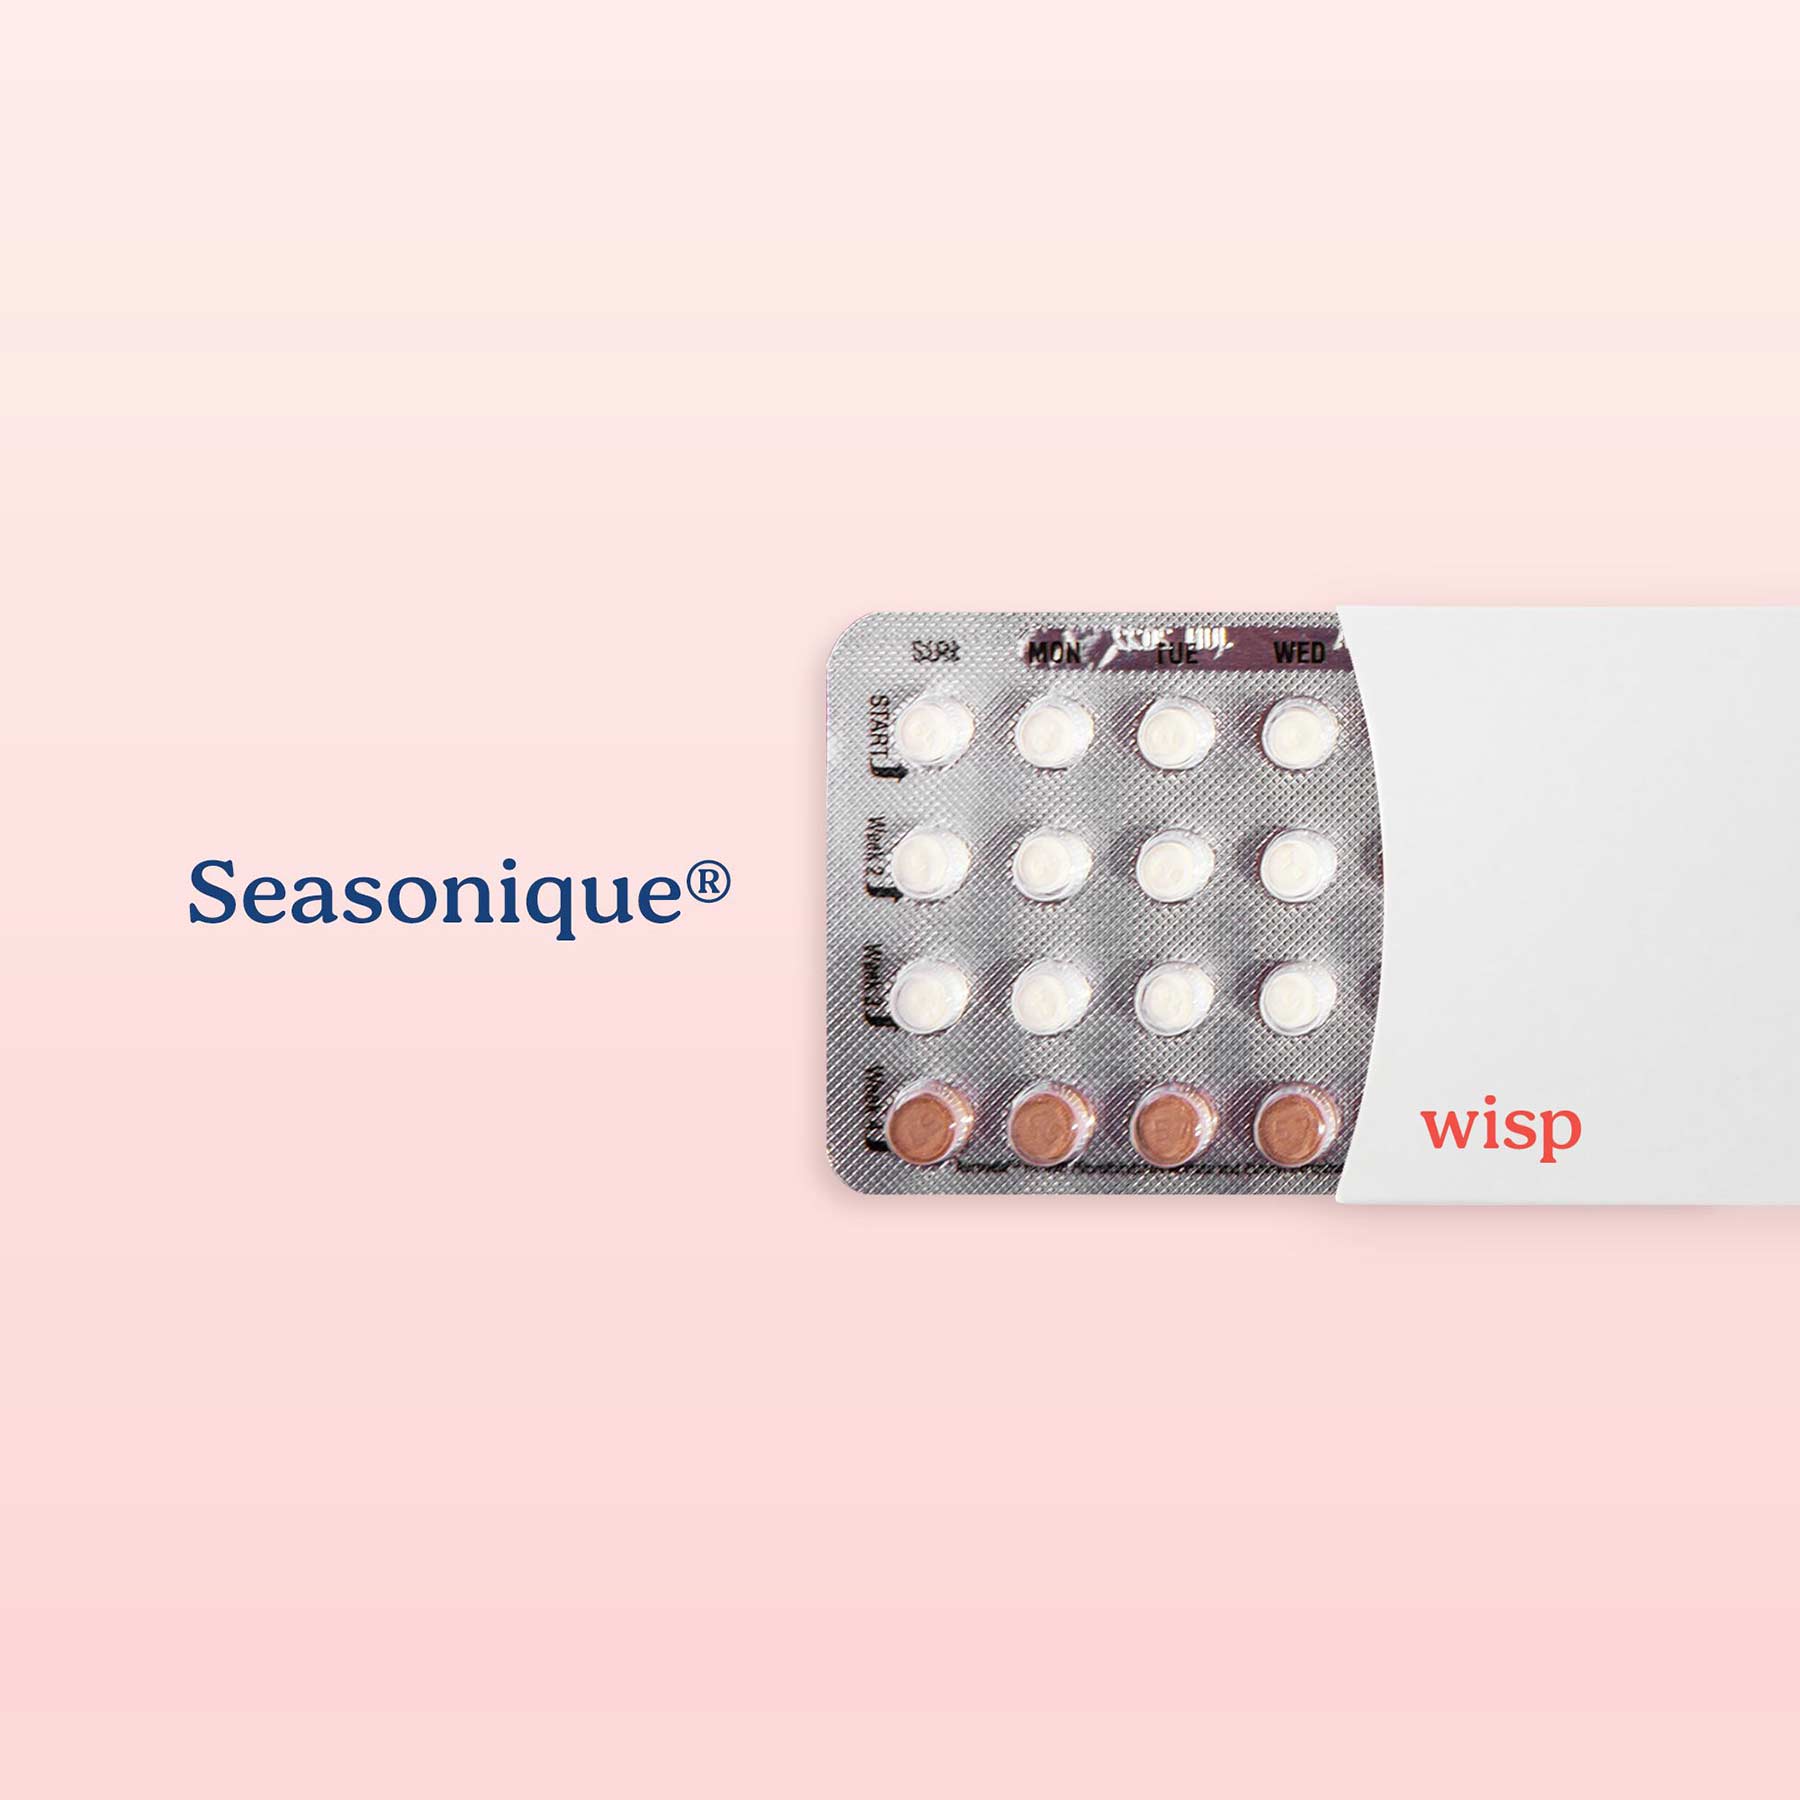 Packet of Seasonique birth control pills on a pink background